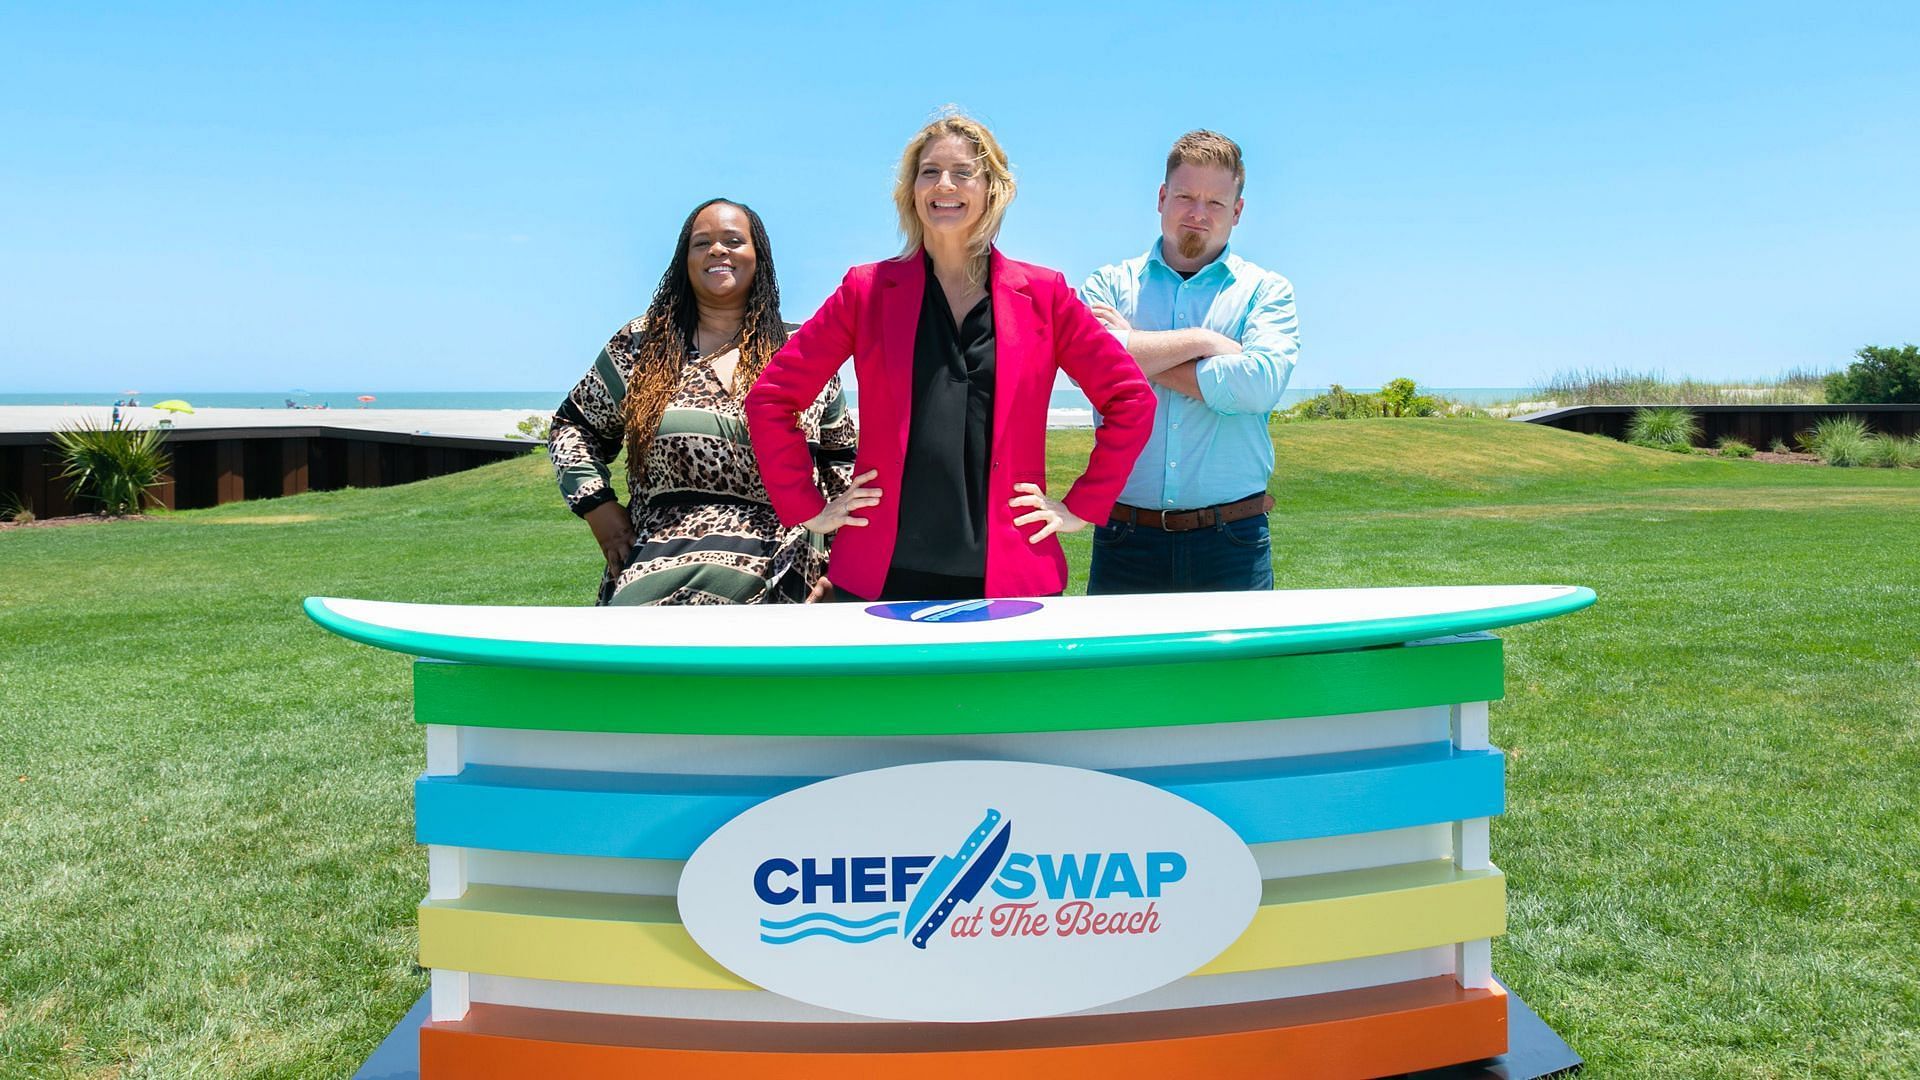 Johanna Wilson Jones and Dylan Foster are ready to judge Chef Swap at the Beach 